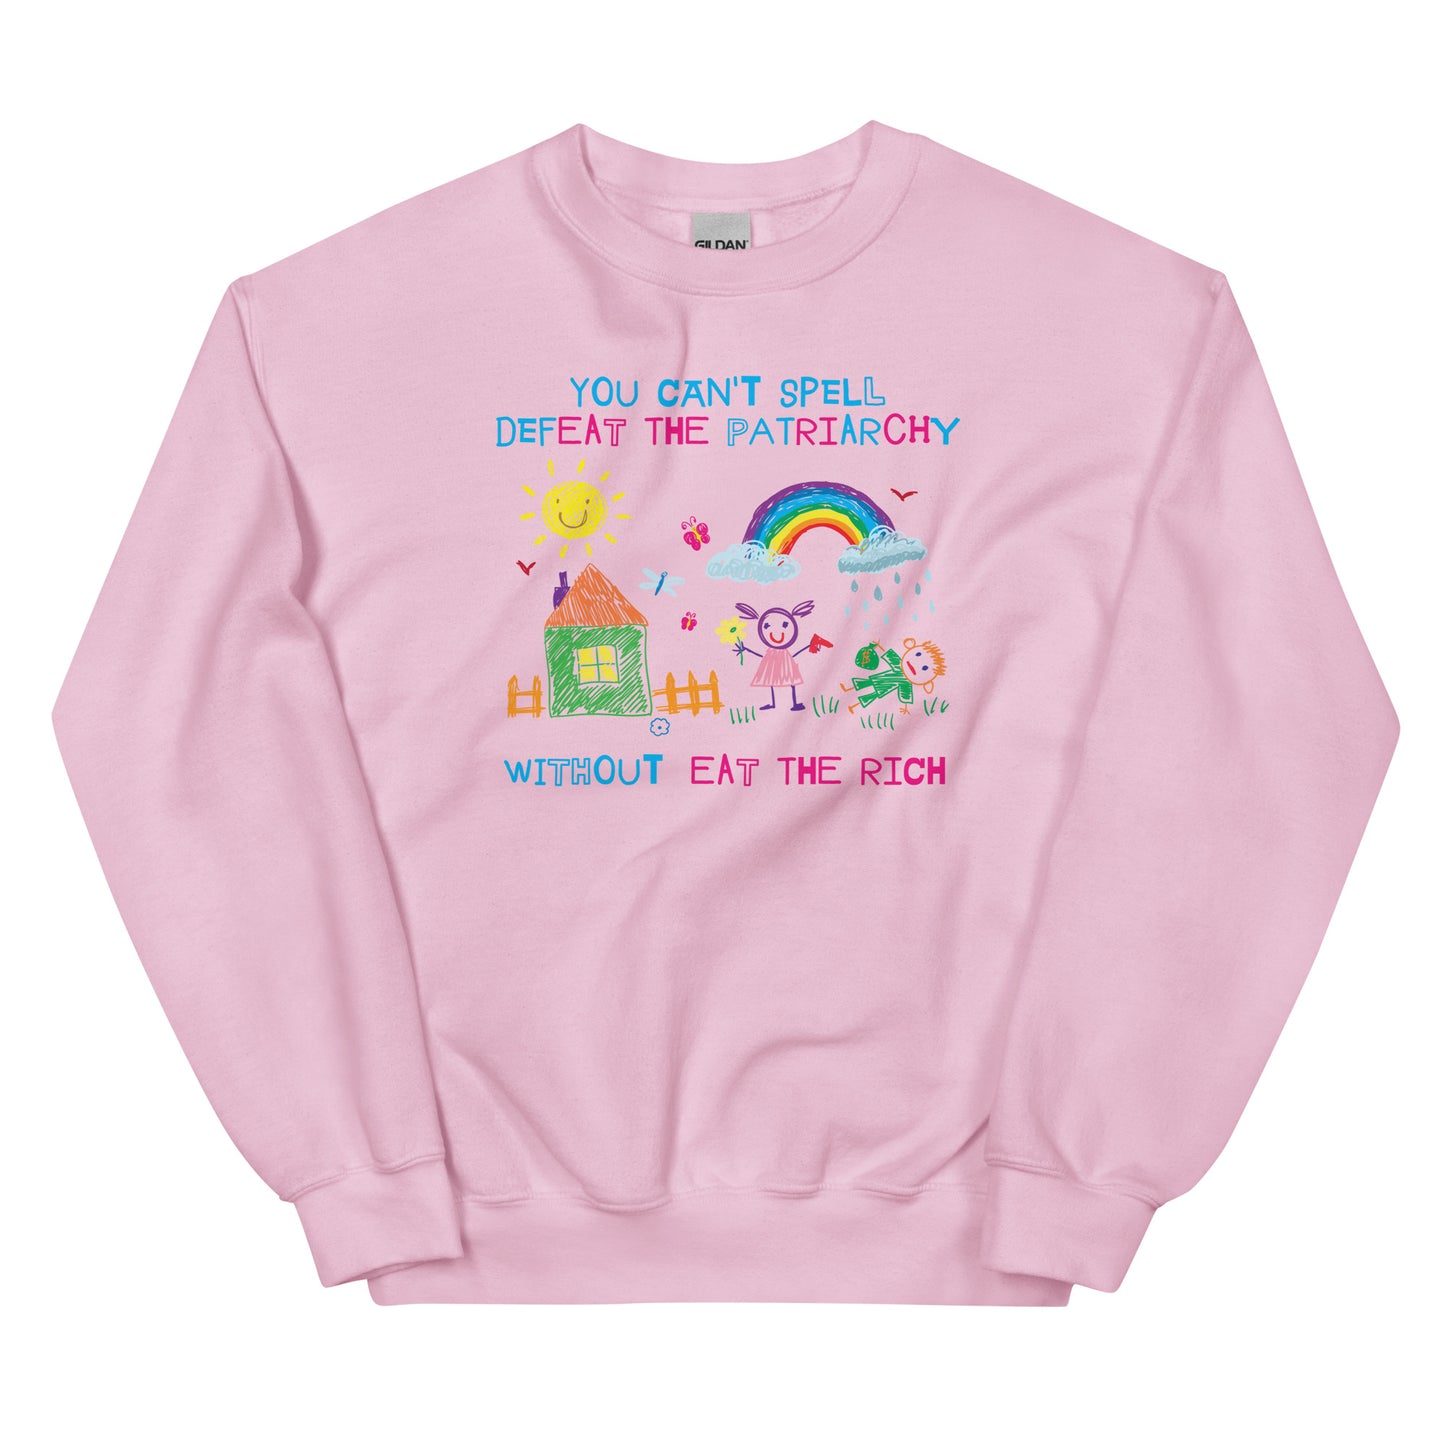 You Can't Spell Defeat the Patriarchy Without Eat the Rich Unisex Sweatshirt